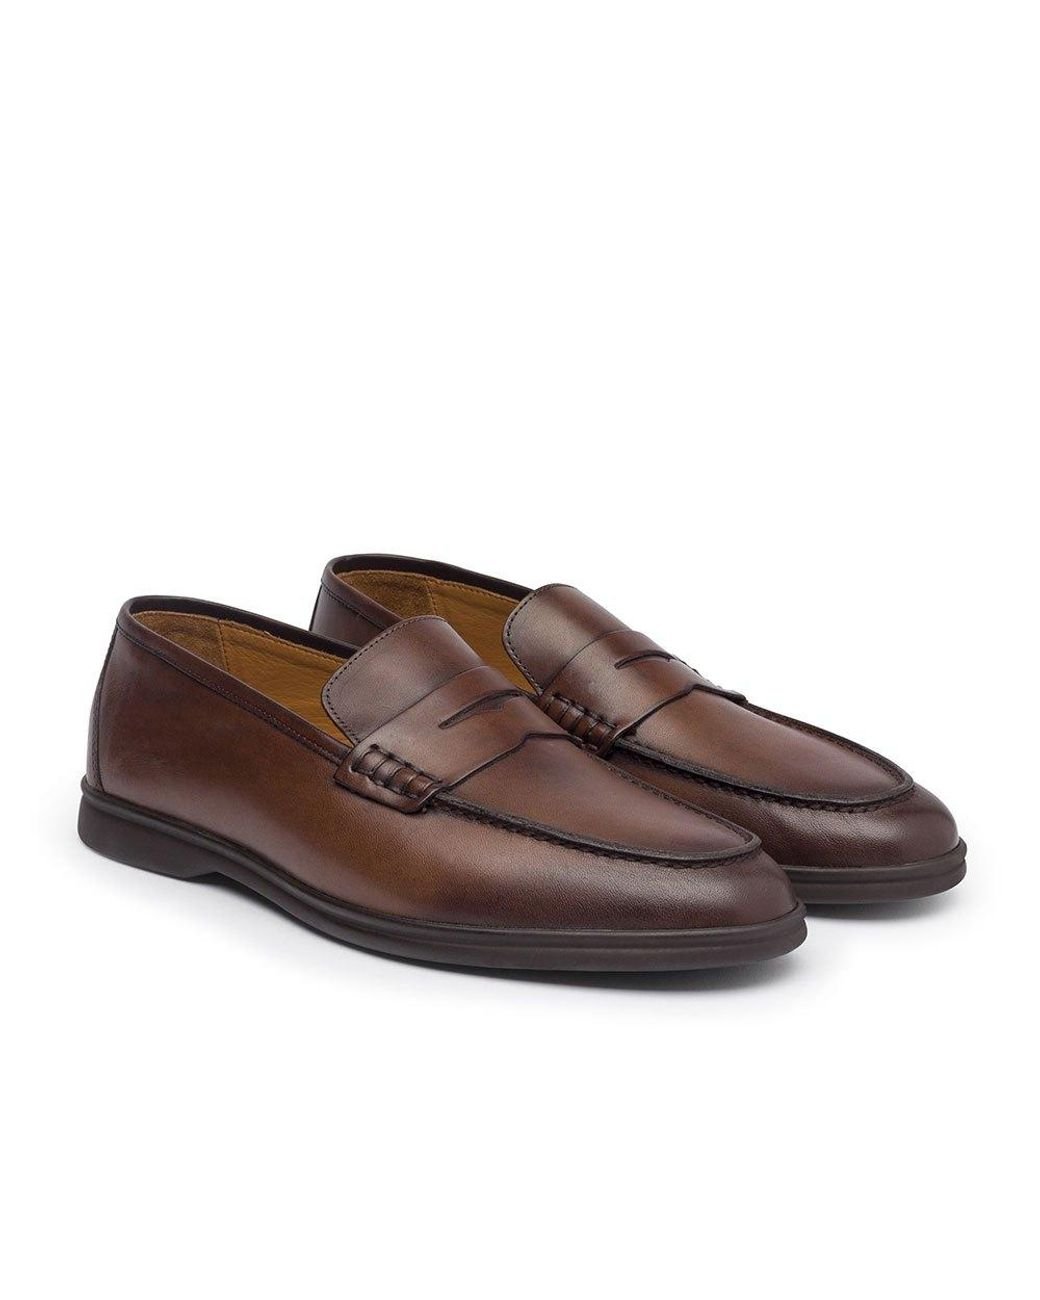 Hackett Hr Penny Leather Shoes in Brown for Men - Lyst